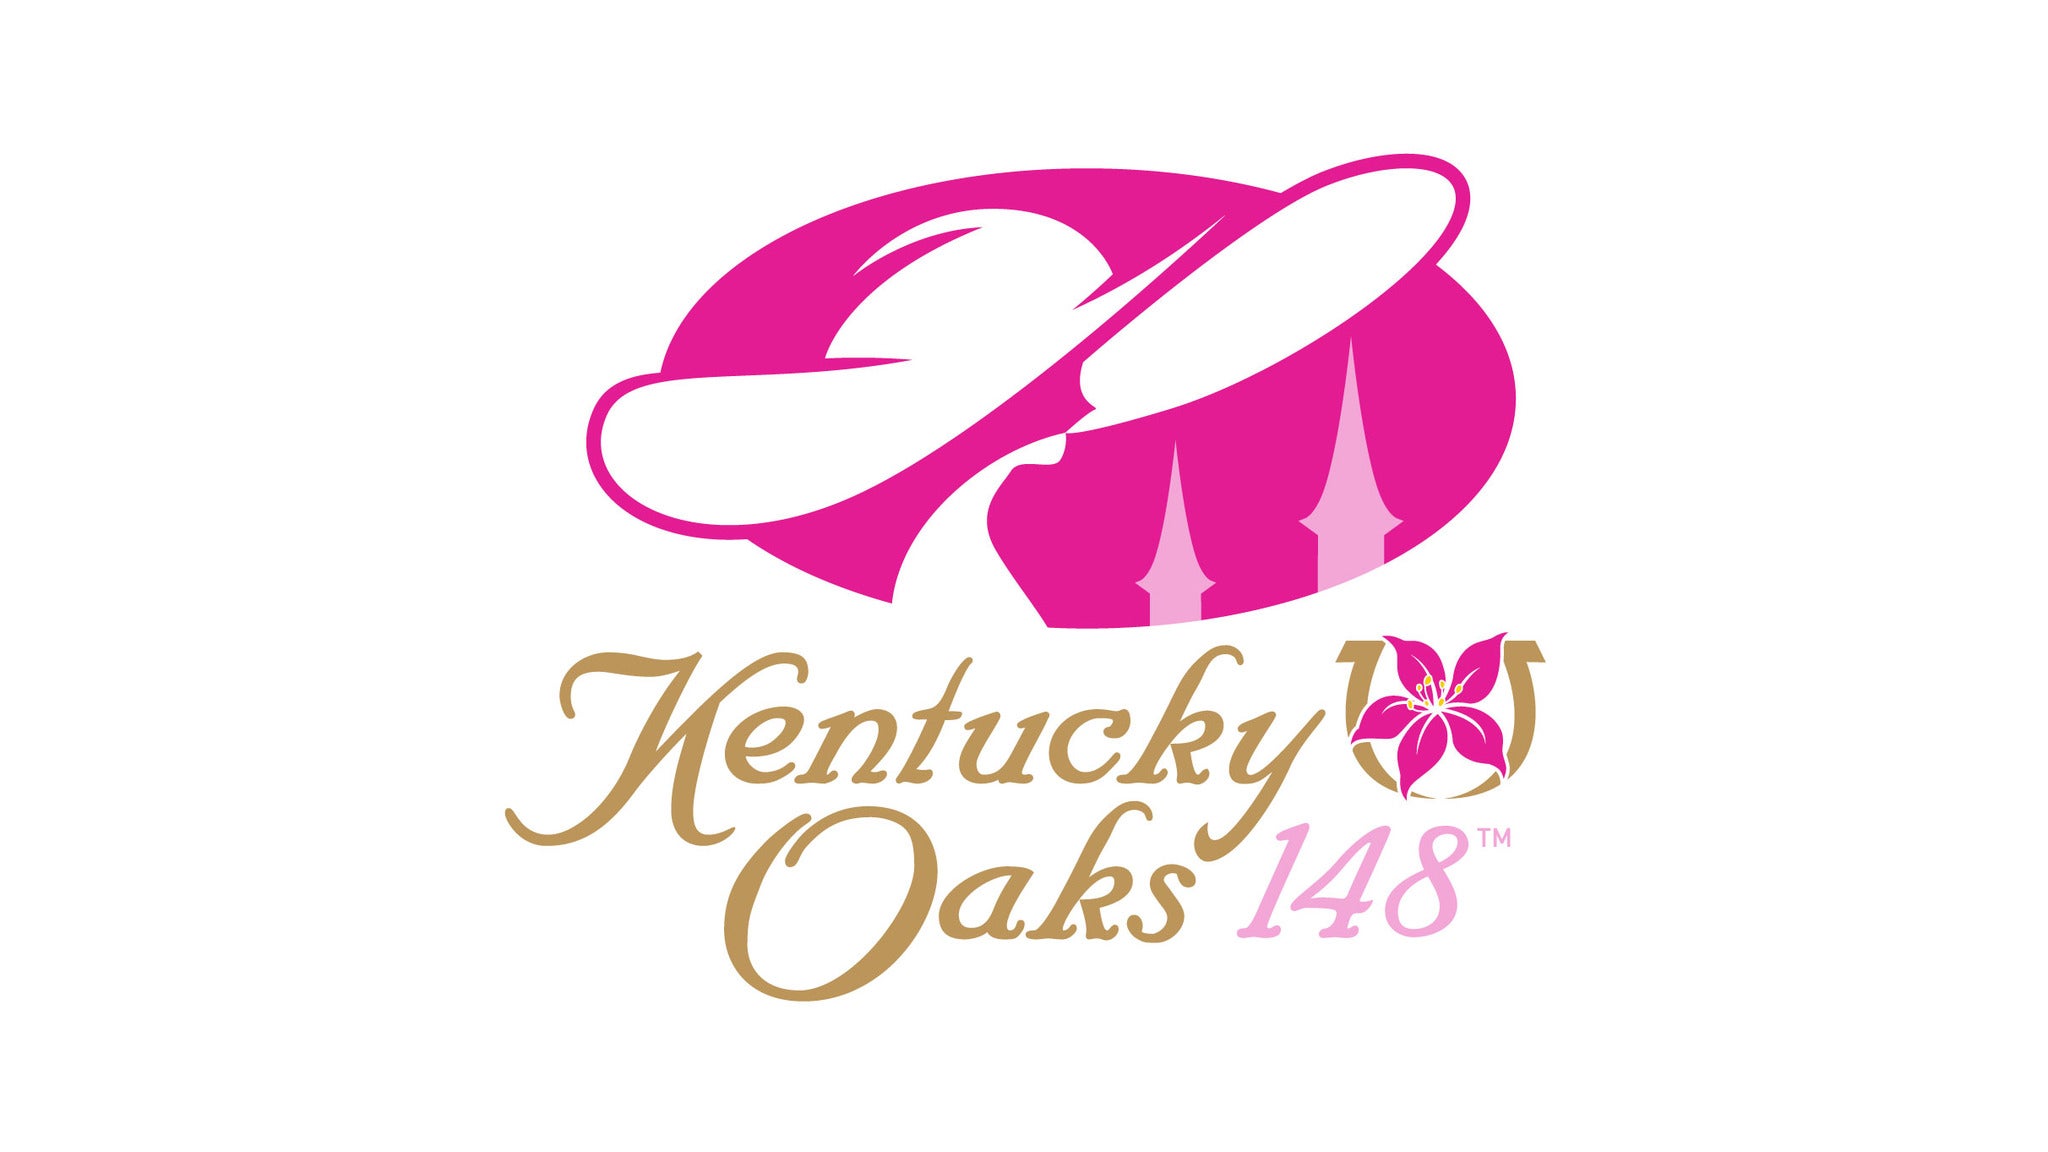 148th Kentucky Oaks - Infield General Admission *No Front Side Access in Louisville promo photo for Discount Purchase Pricing presale offer code